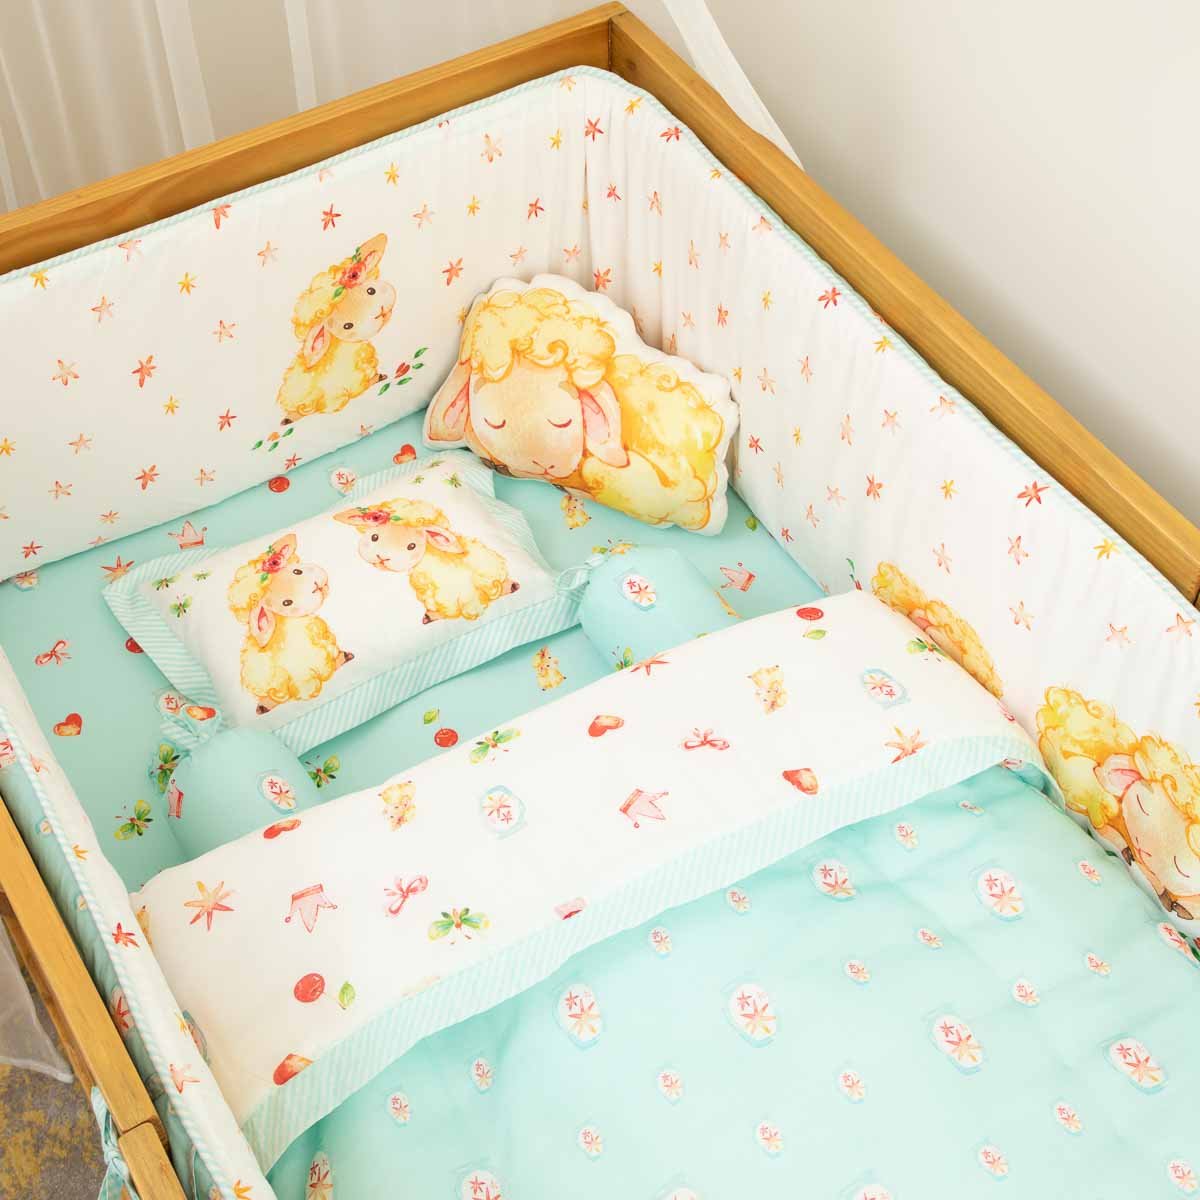 Fluffy the Sheep - Cot Bedding Set - Blue